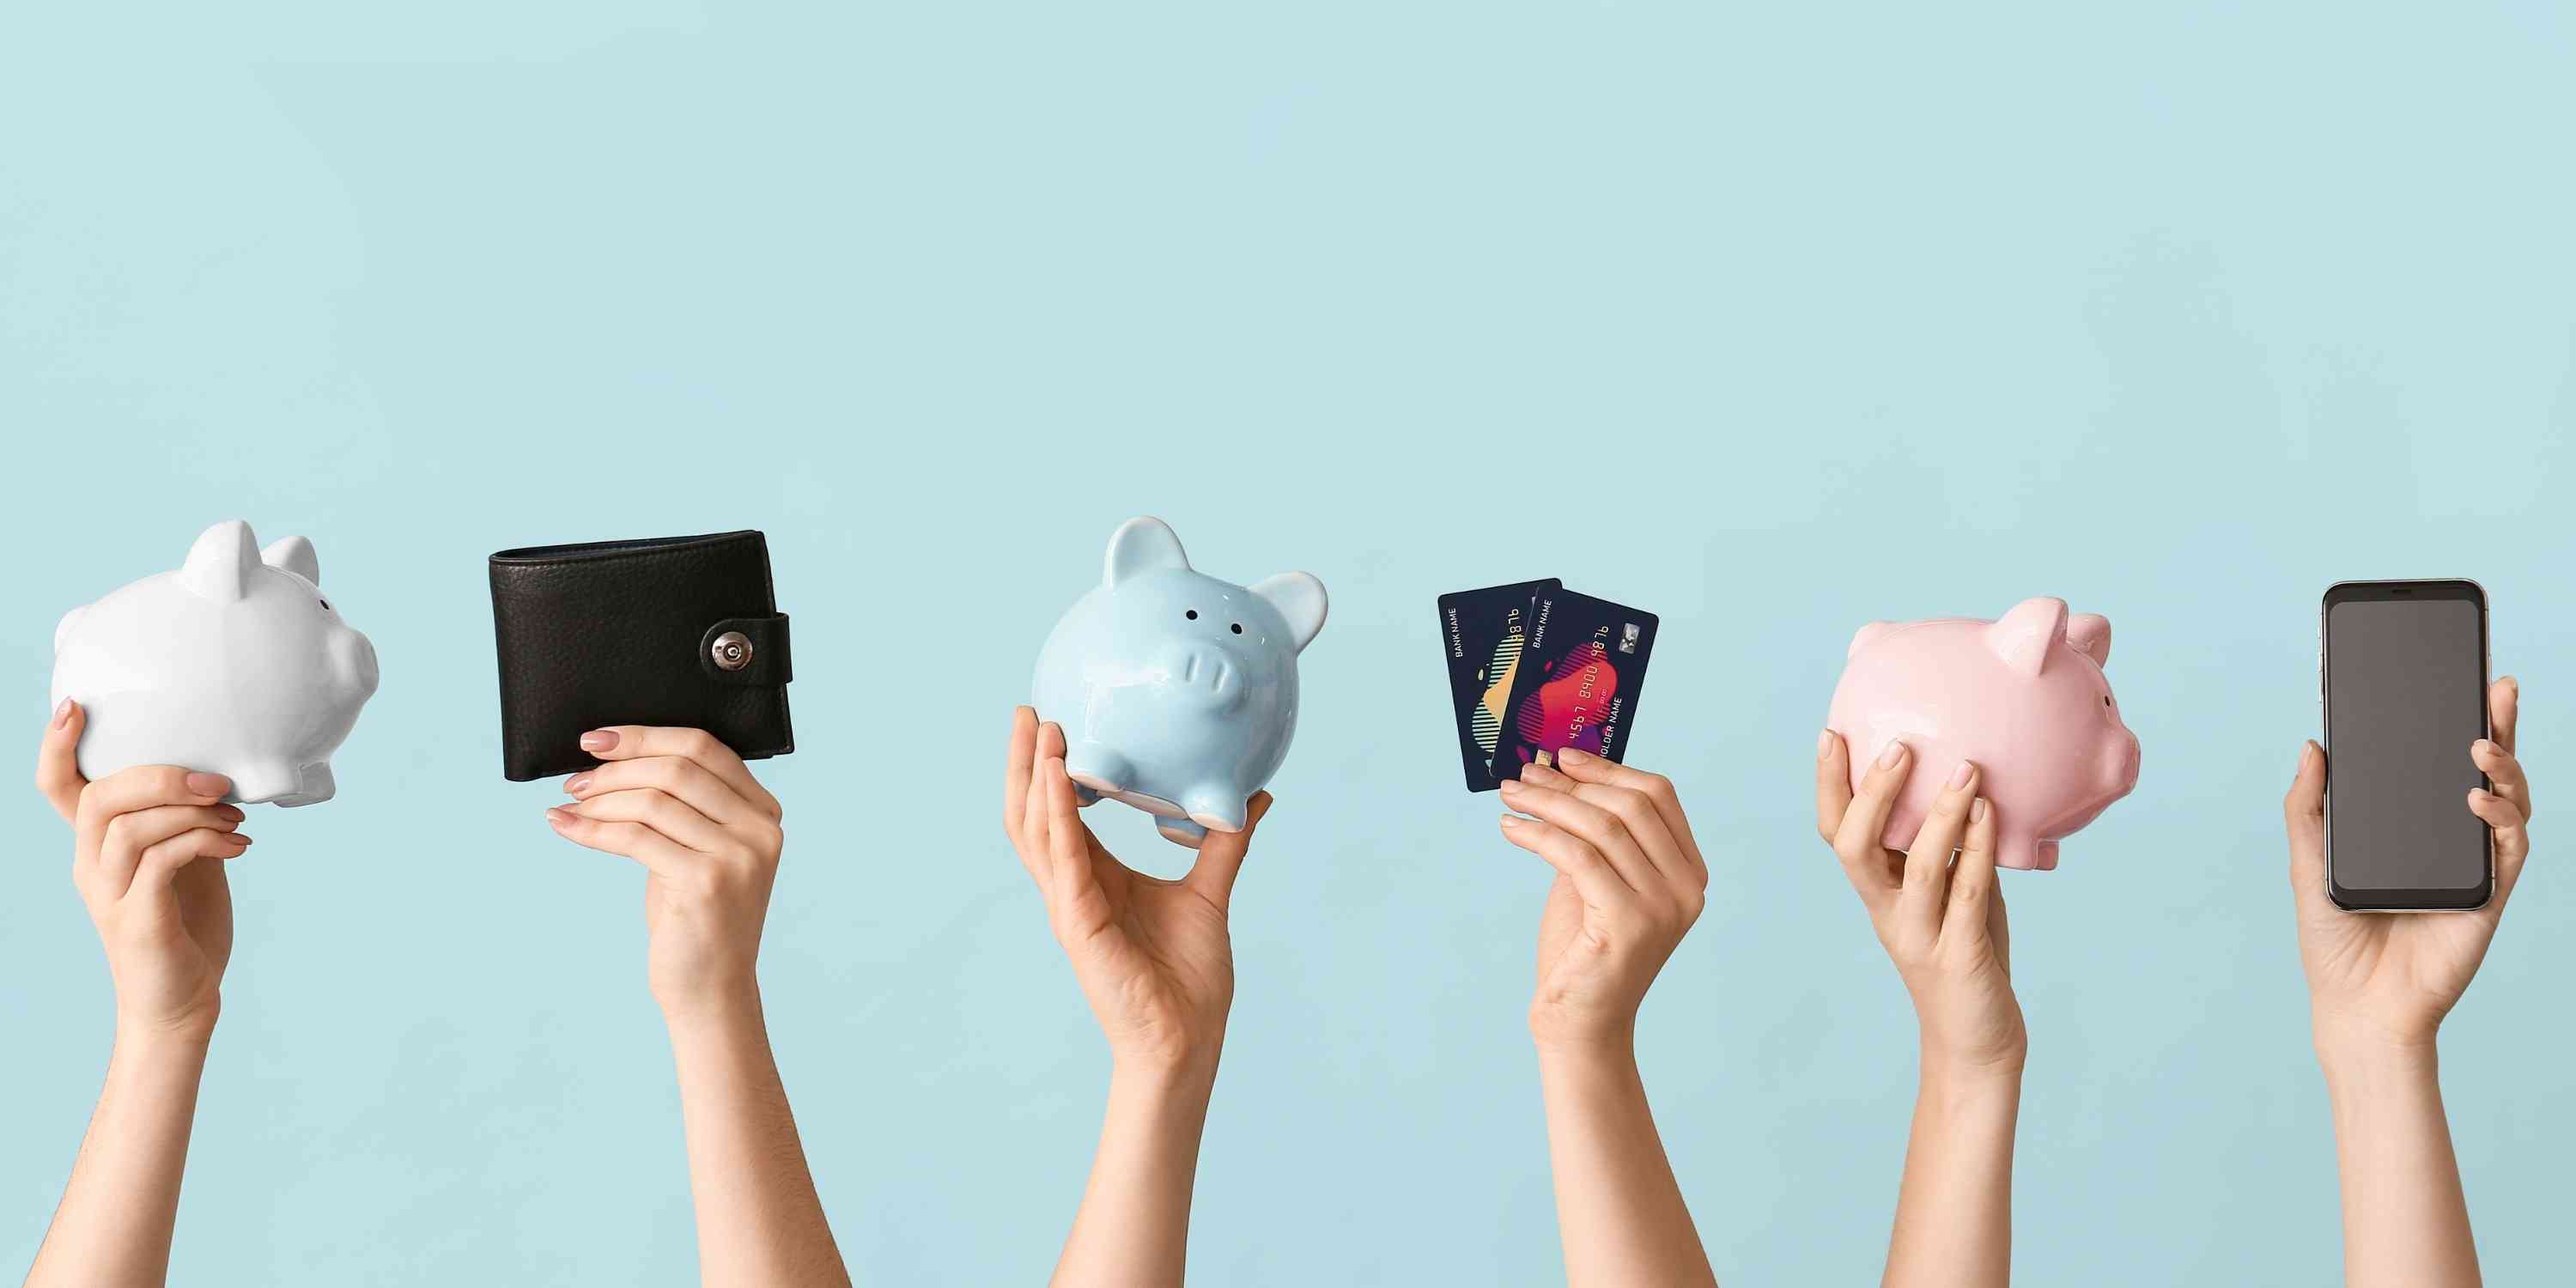 Hands hold up different banking items like wallet, cards and phone.